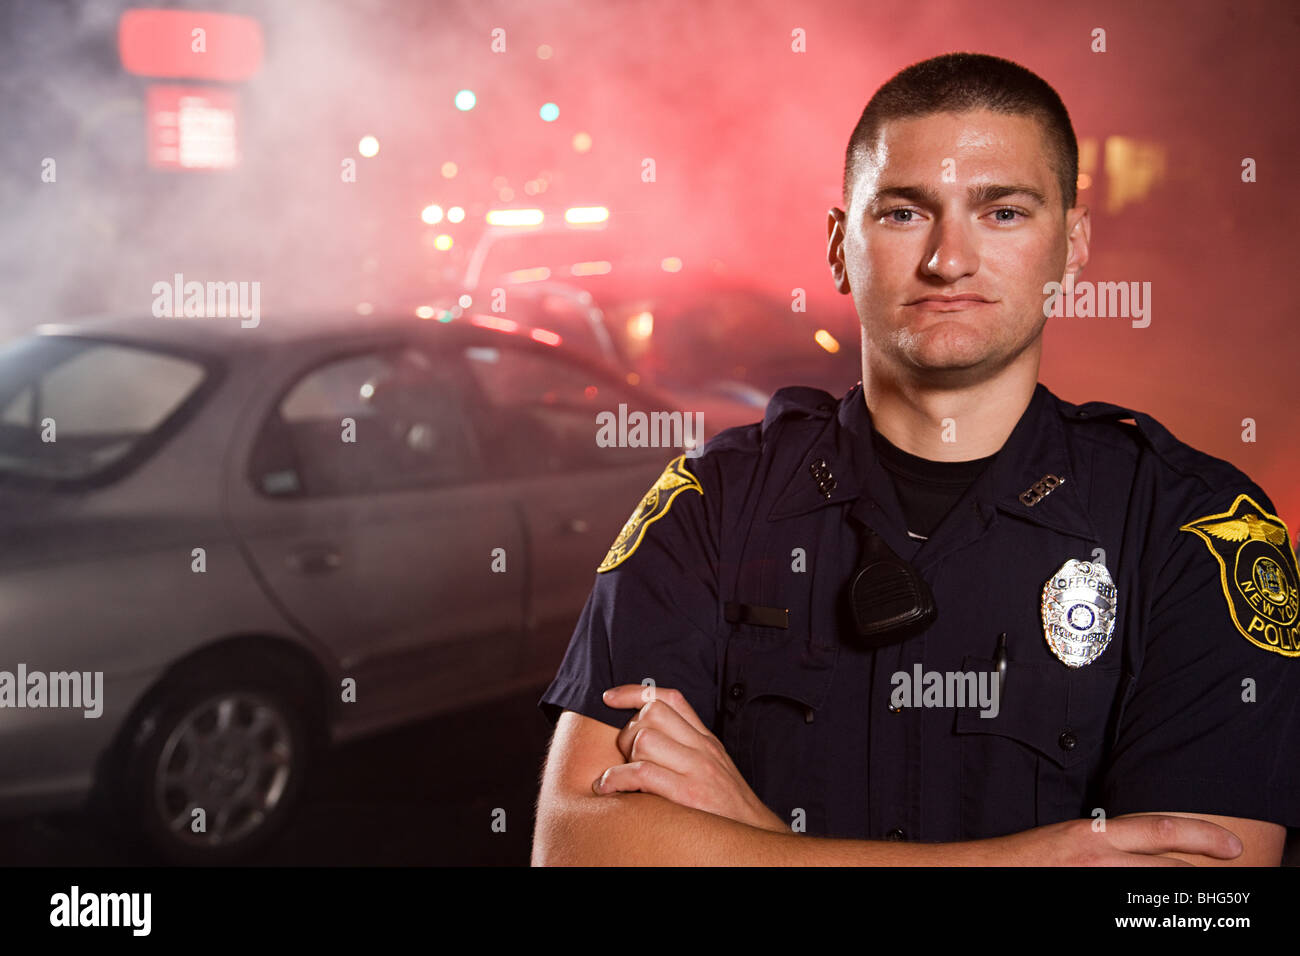 Police officer at scene of accident Stock Photo